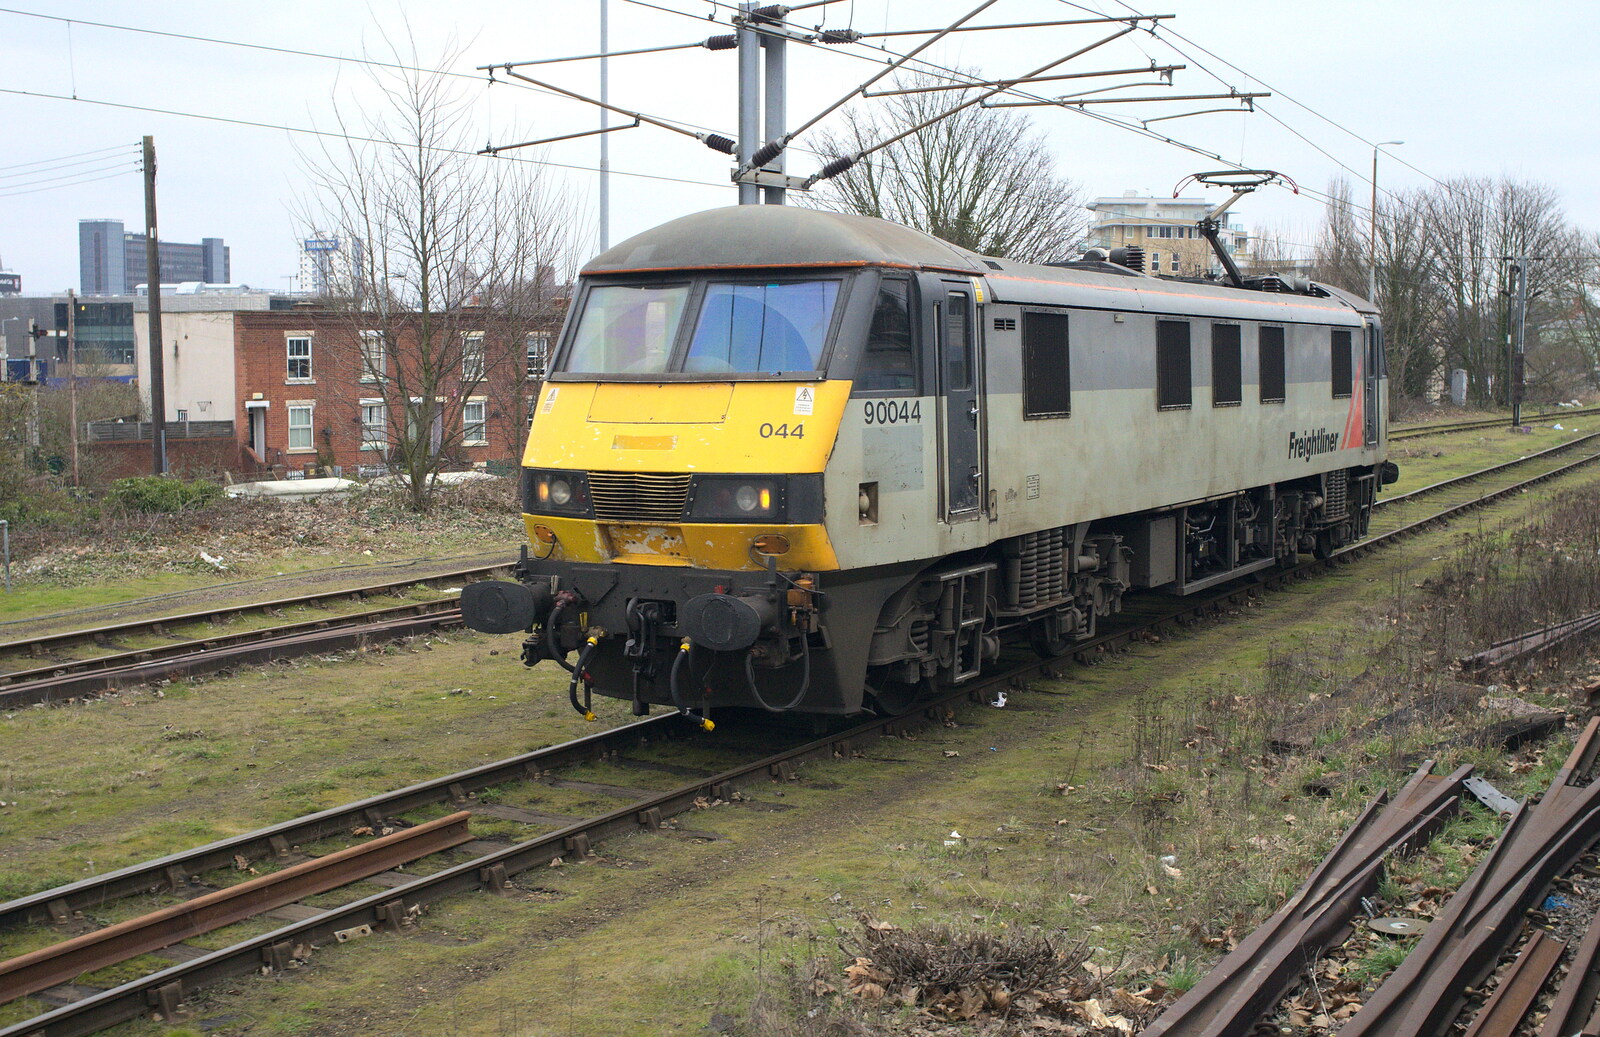 Class 90 90044 in Freightliner livery from The Demolition of the Bacon Factory, Ipswich, Suffolk - 20th February 2013